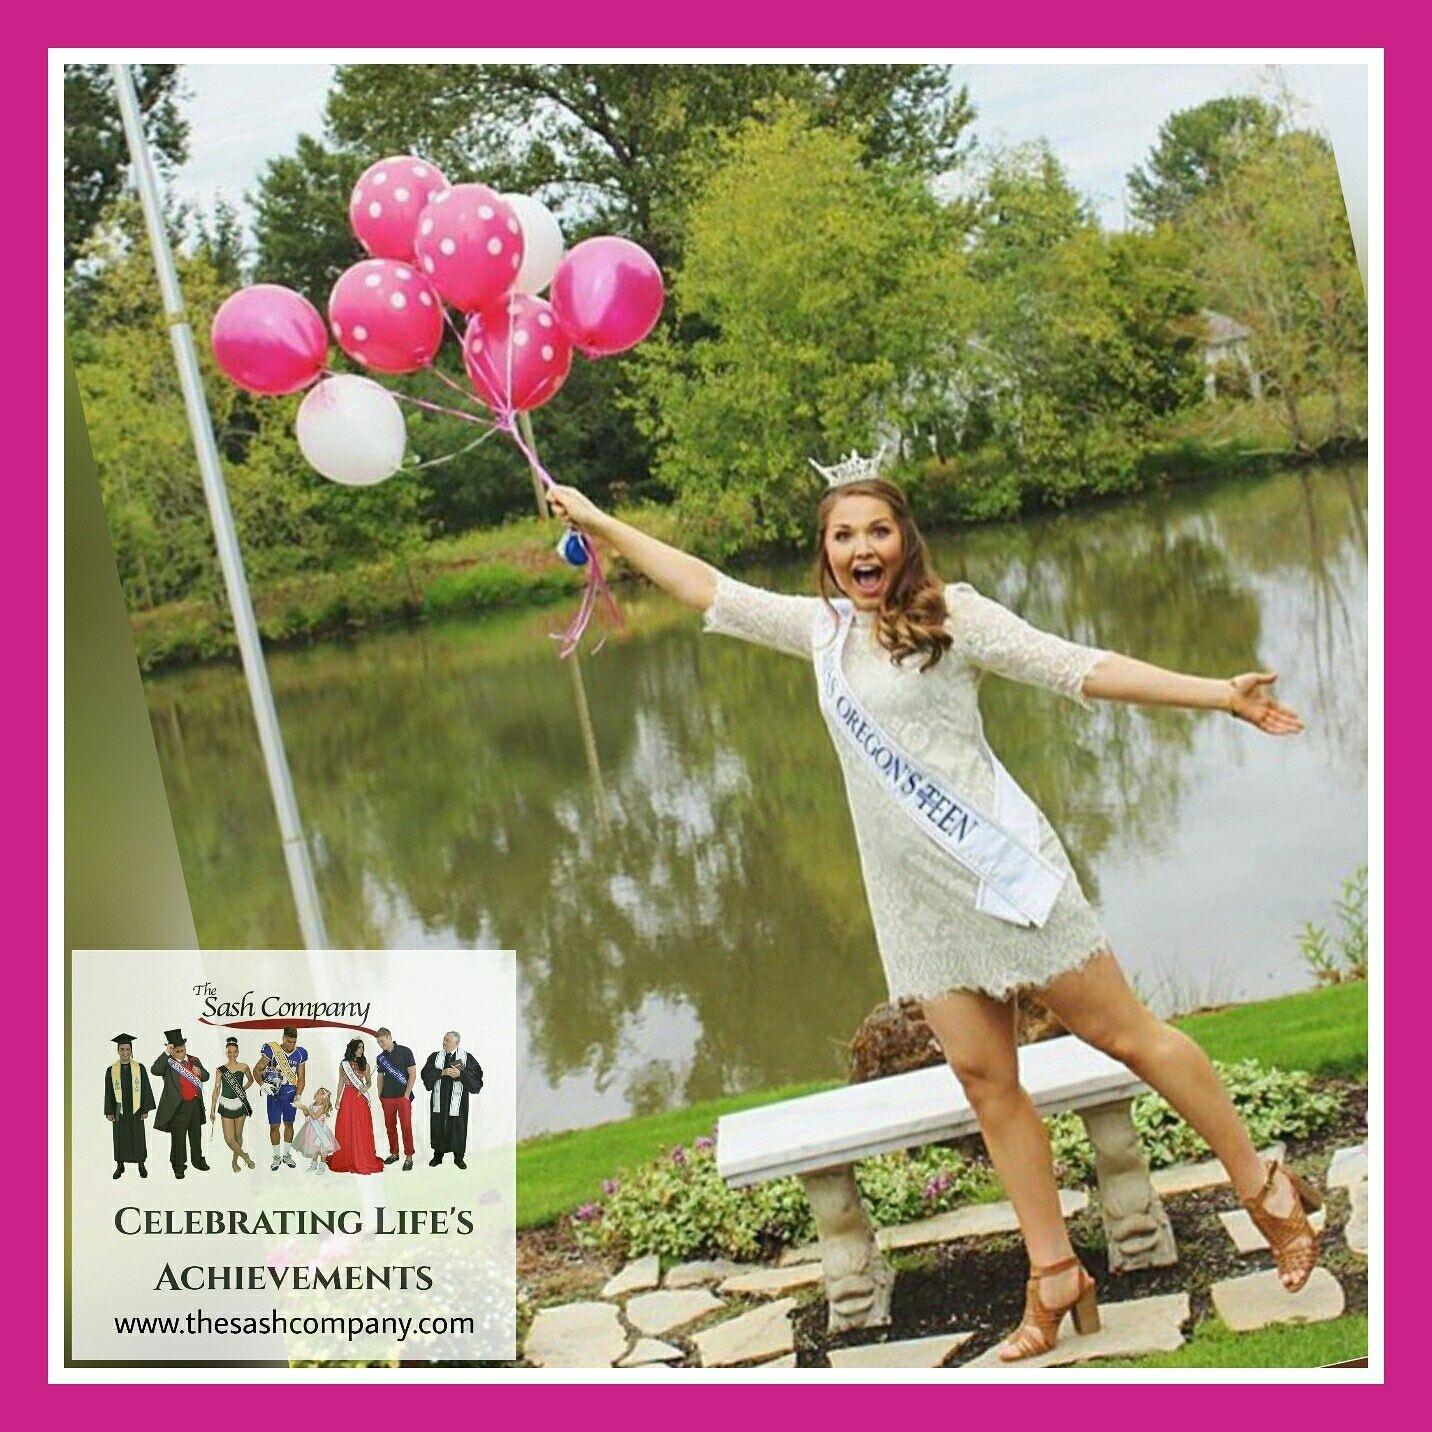 MAOTeen Miss Oregon with Balloons